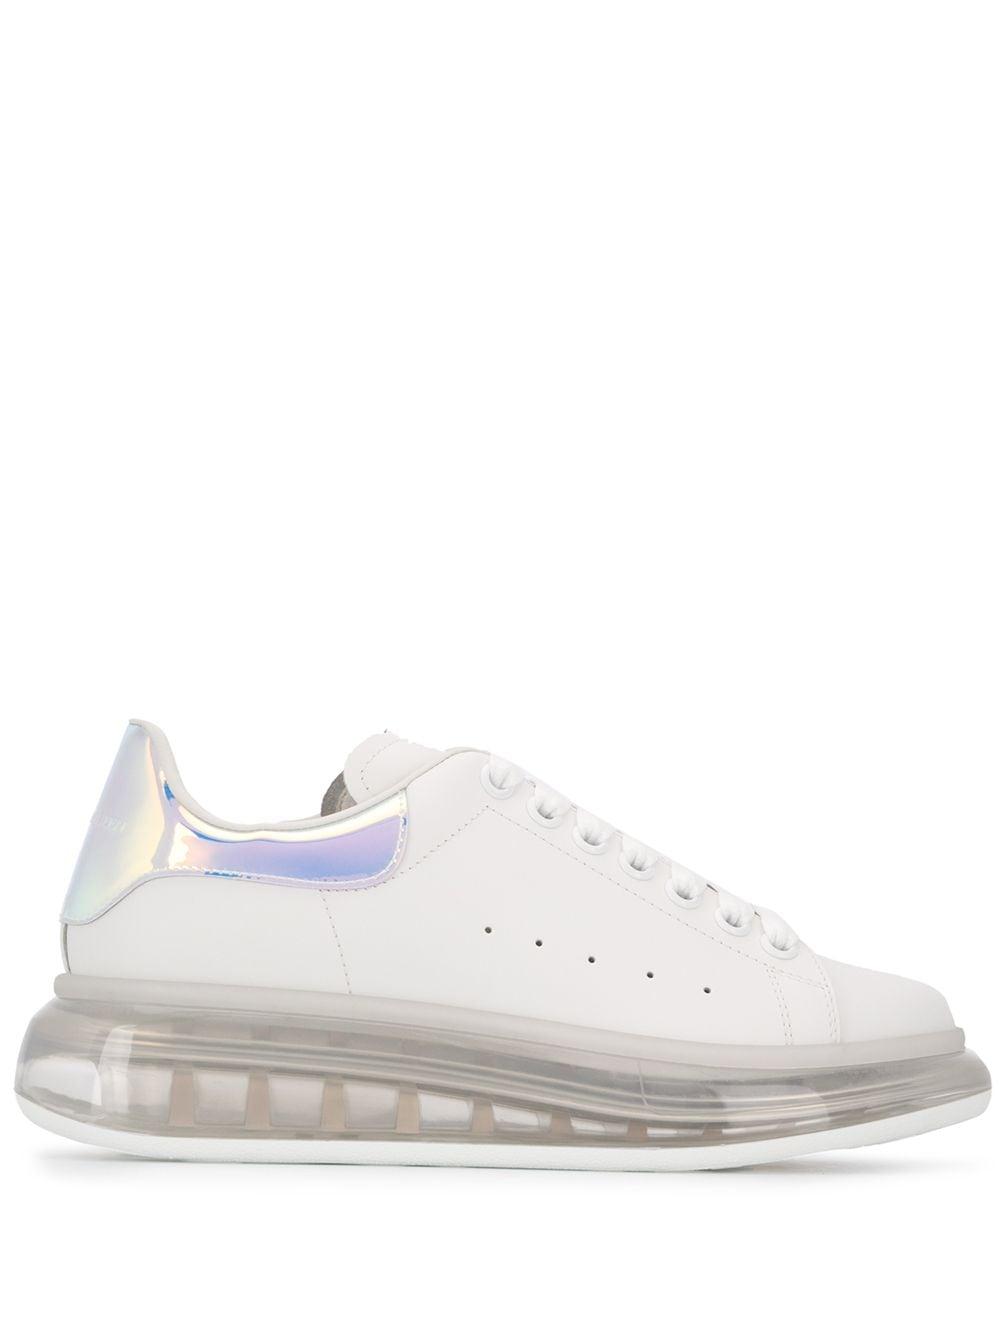 Alexander McQueen Leather Oversized Clear Sole Sneakers in White 